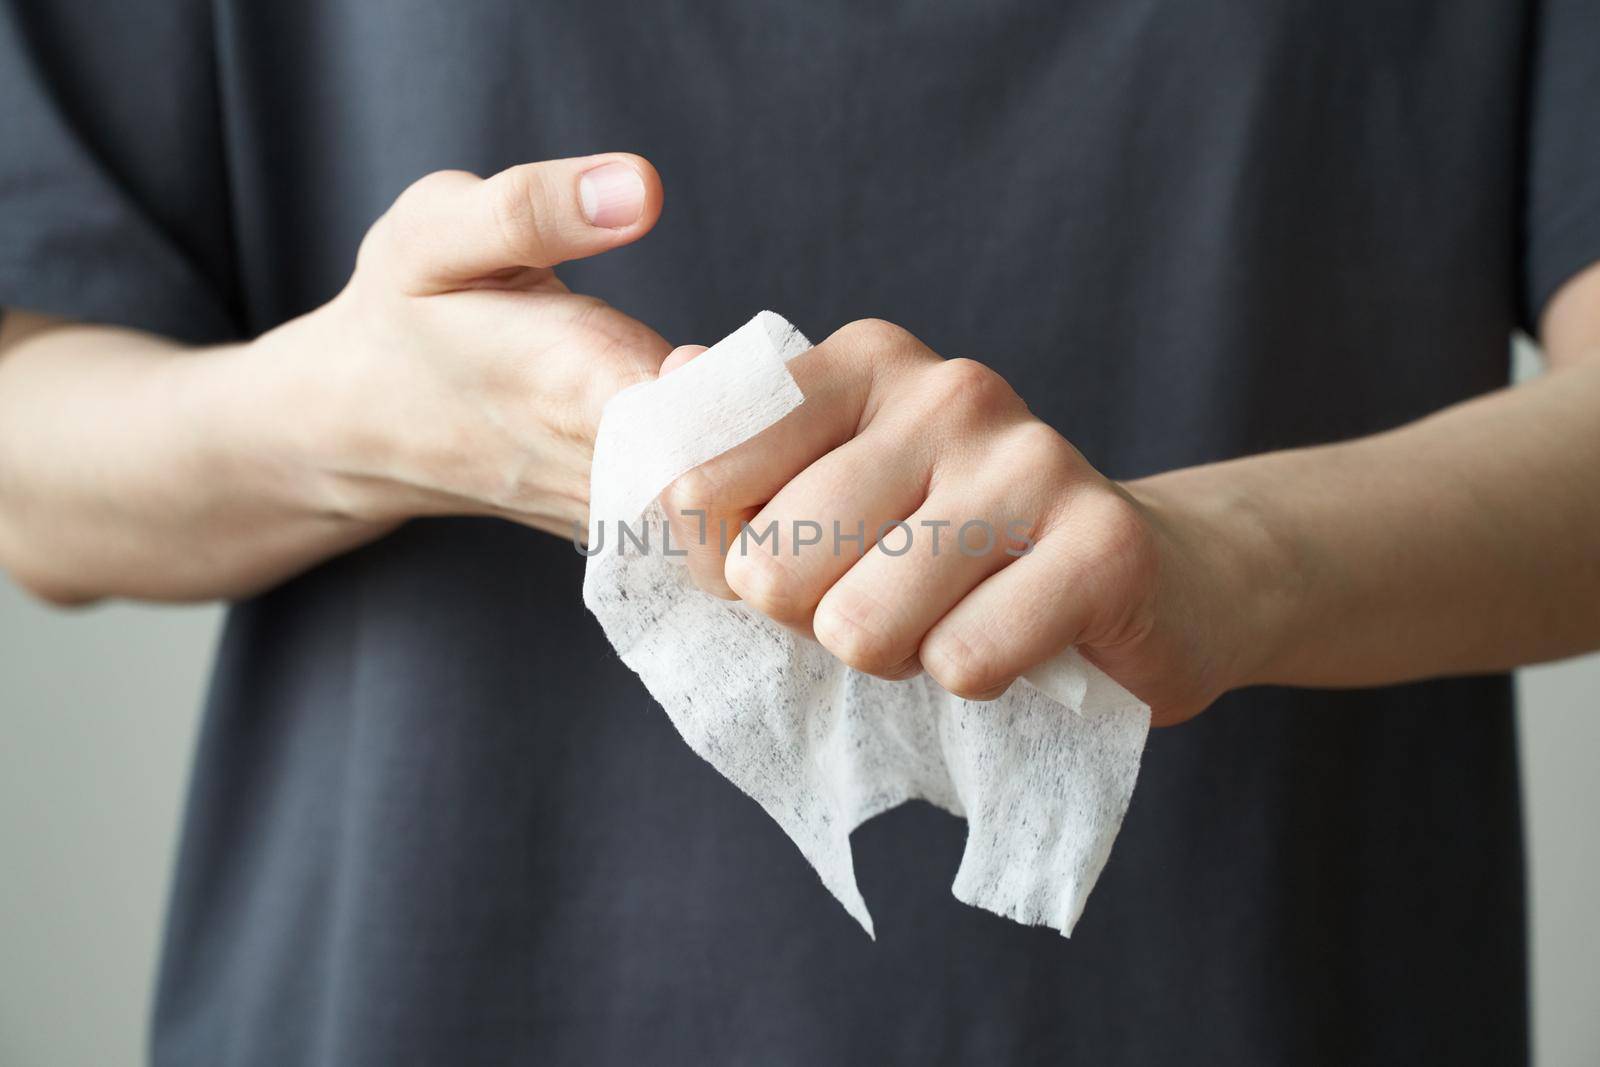 Woman wash hand wet wipes, to prevent illness Novel coronavirus 2019-nCoV after public place by NataBene